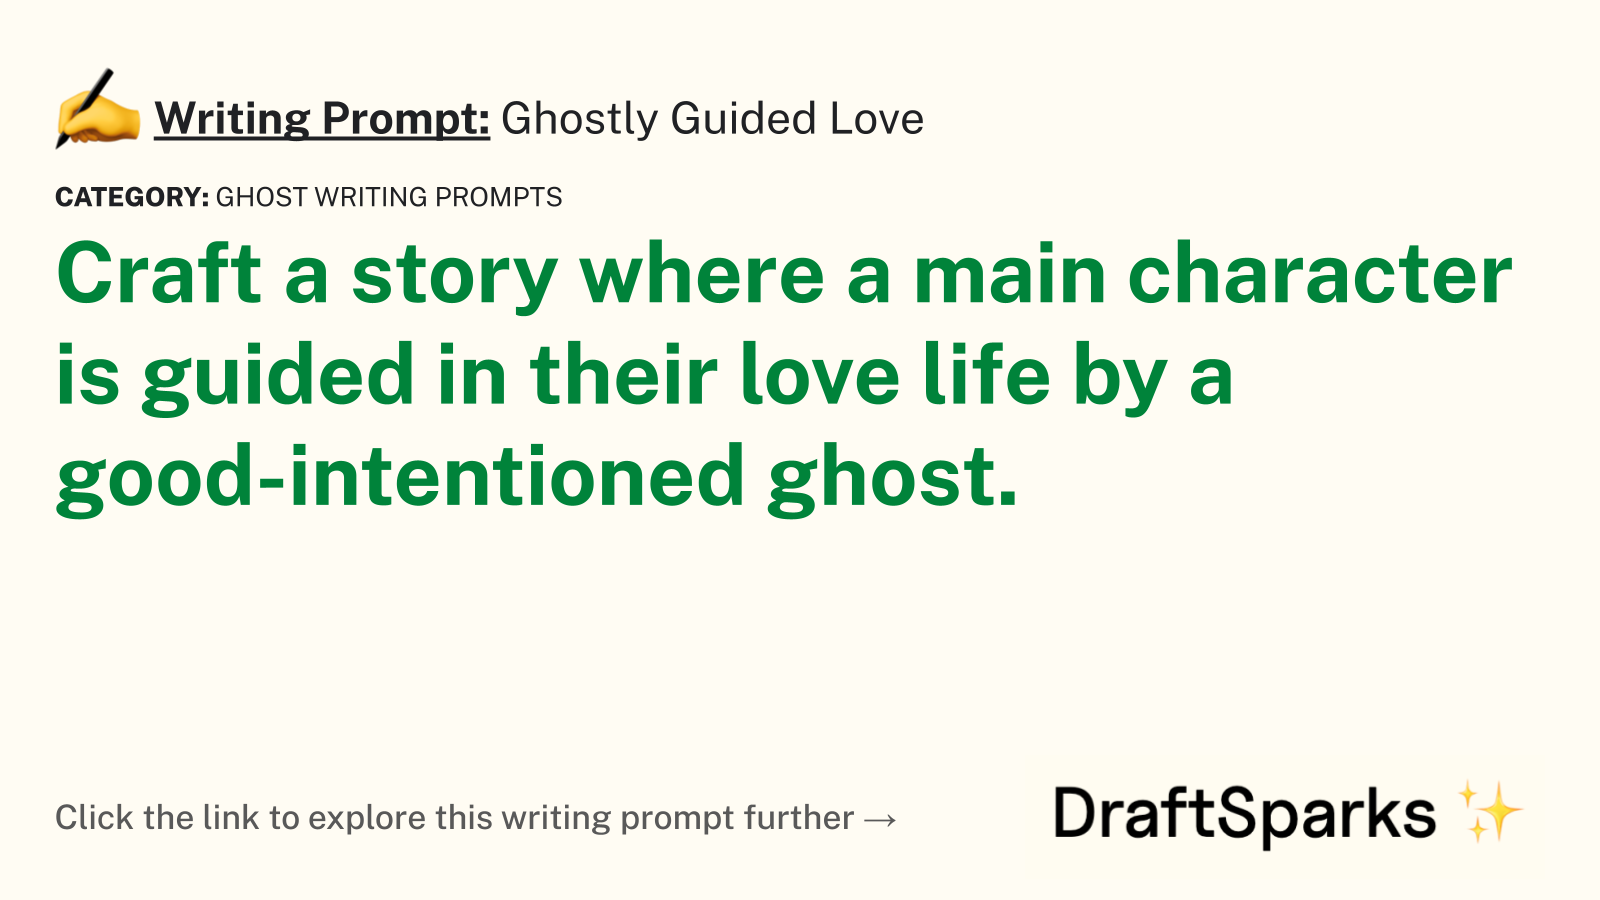 Ghostly Guided Love